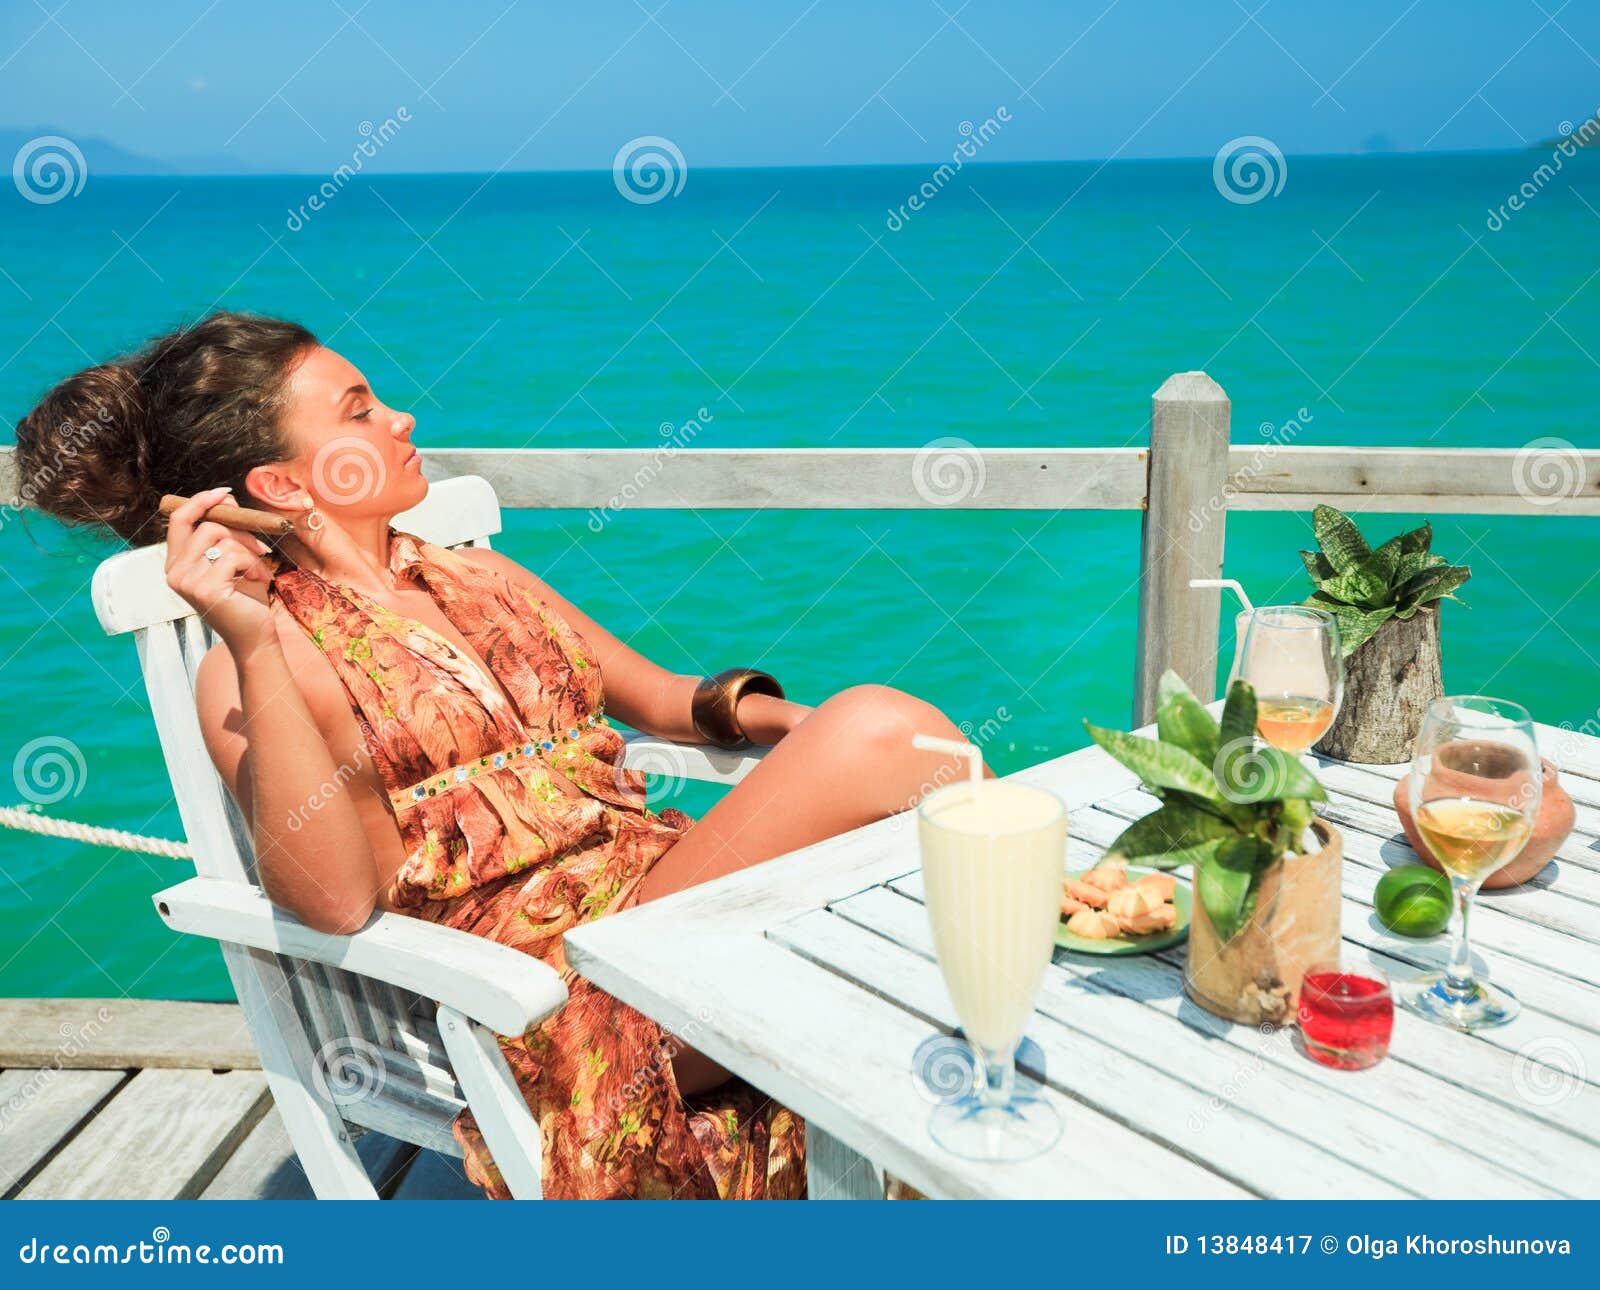 Dinner on the beach stock image. Image of buffet, dressed - 13848417